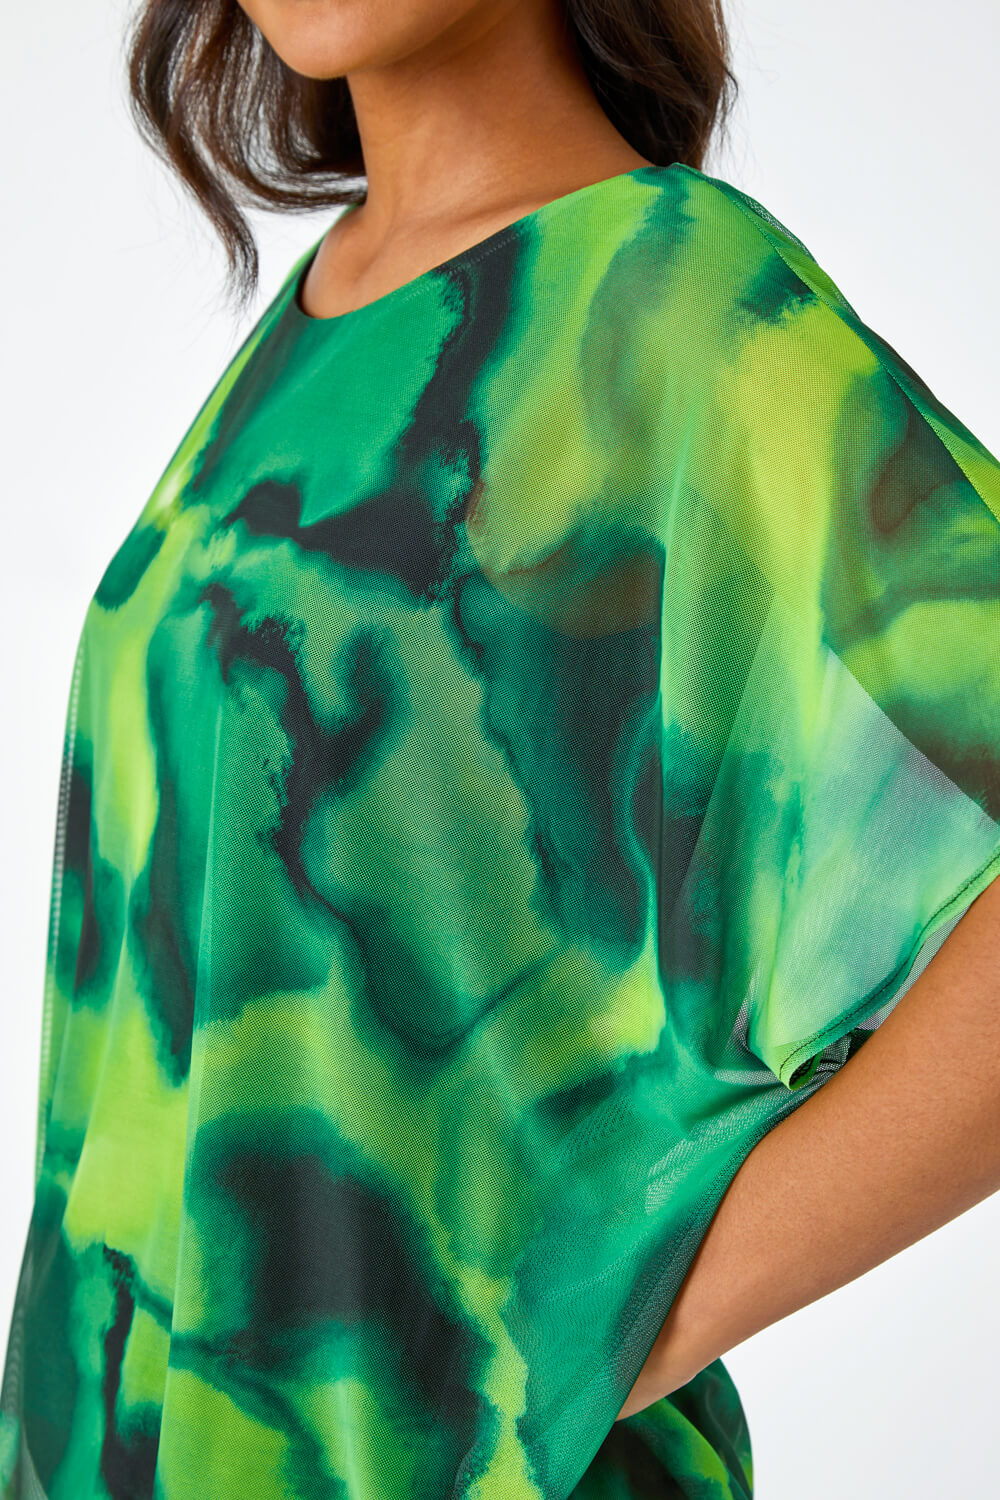 Green Printed Mesh Overlay Batwing Top, Image 5 of 5